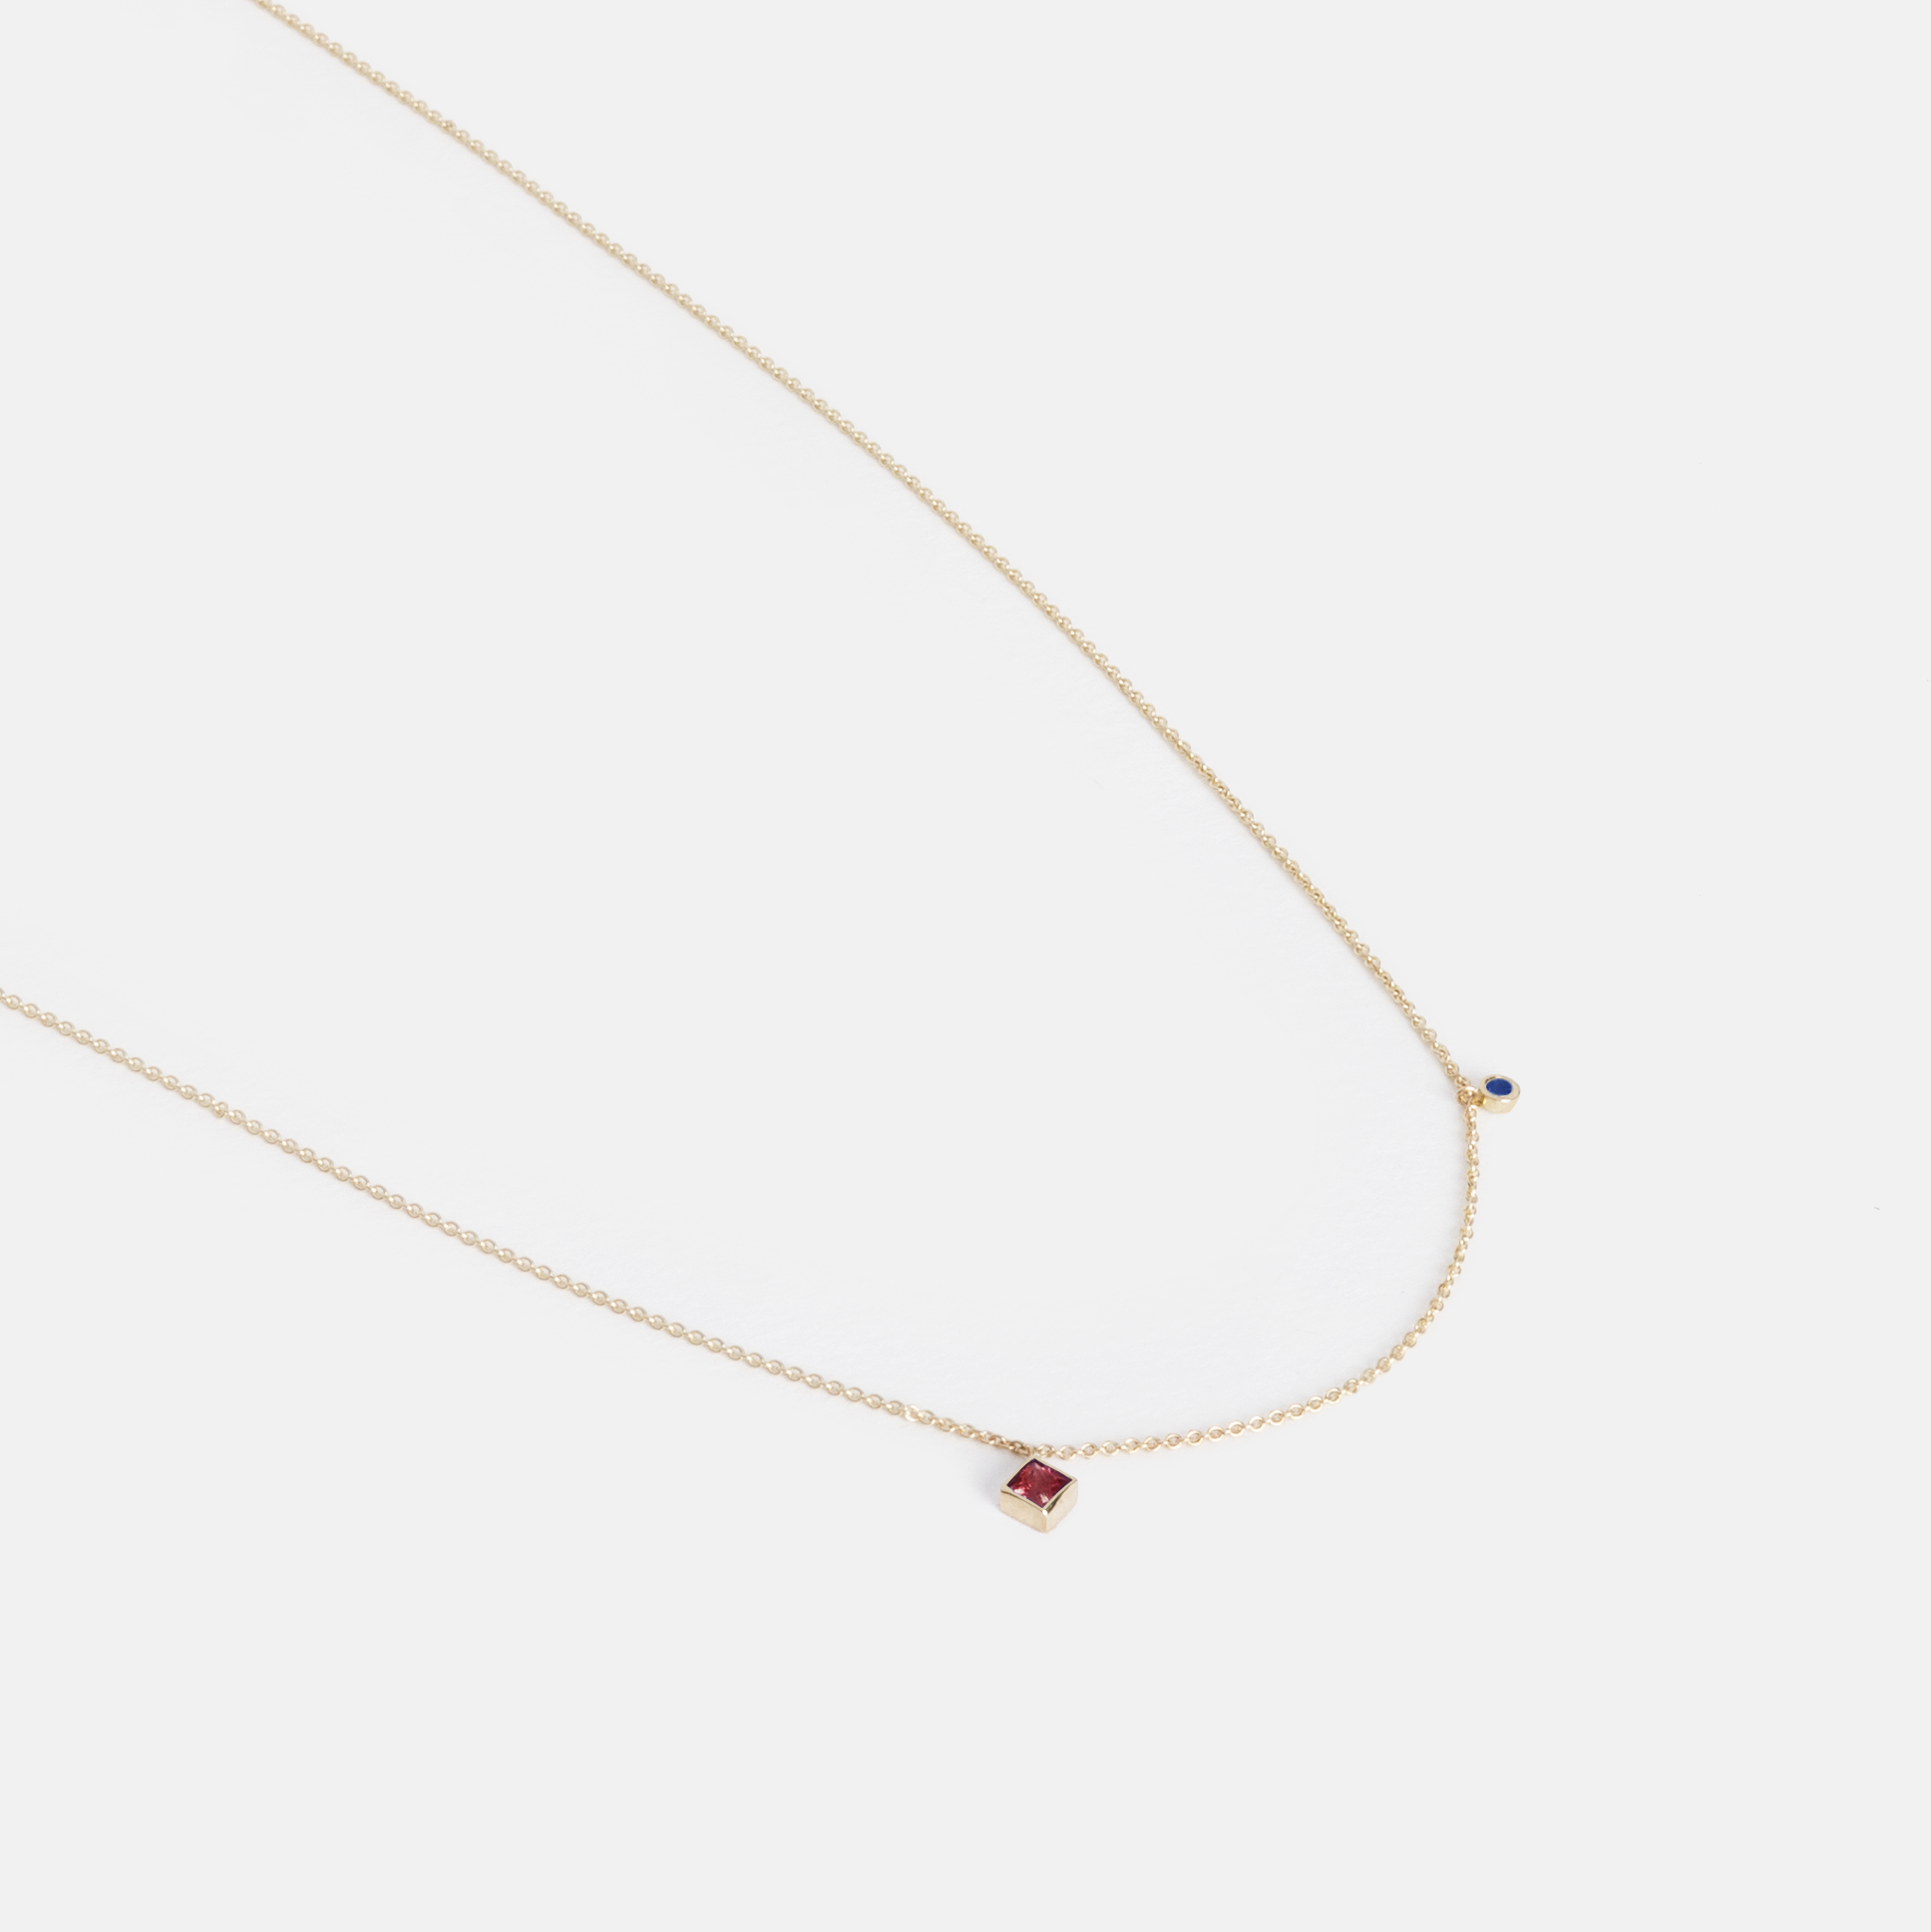 Ibi Delicate Necklace in 14k Gold set with Ruby and sapphire By SHW Fine Jewelry NYC